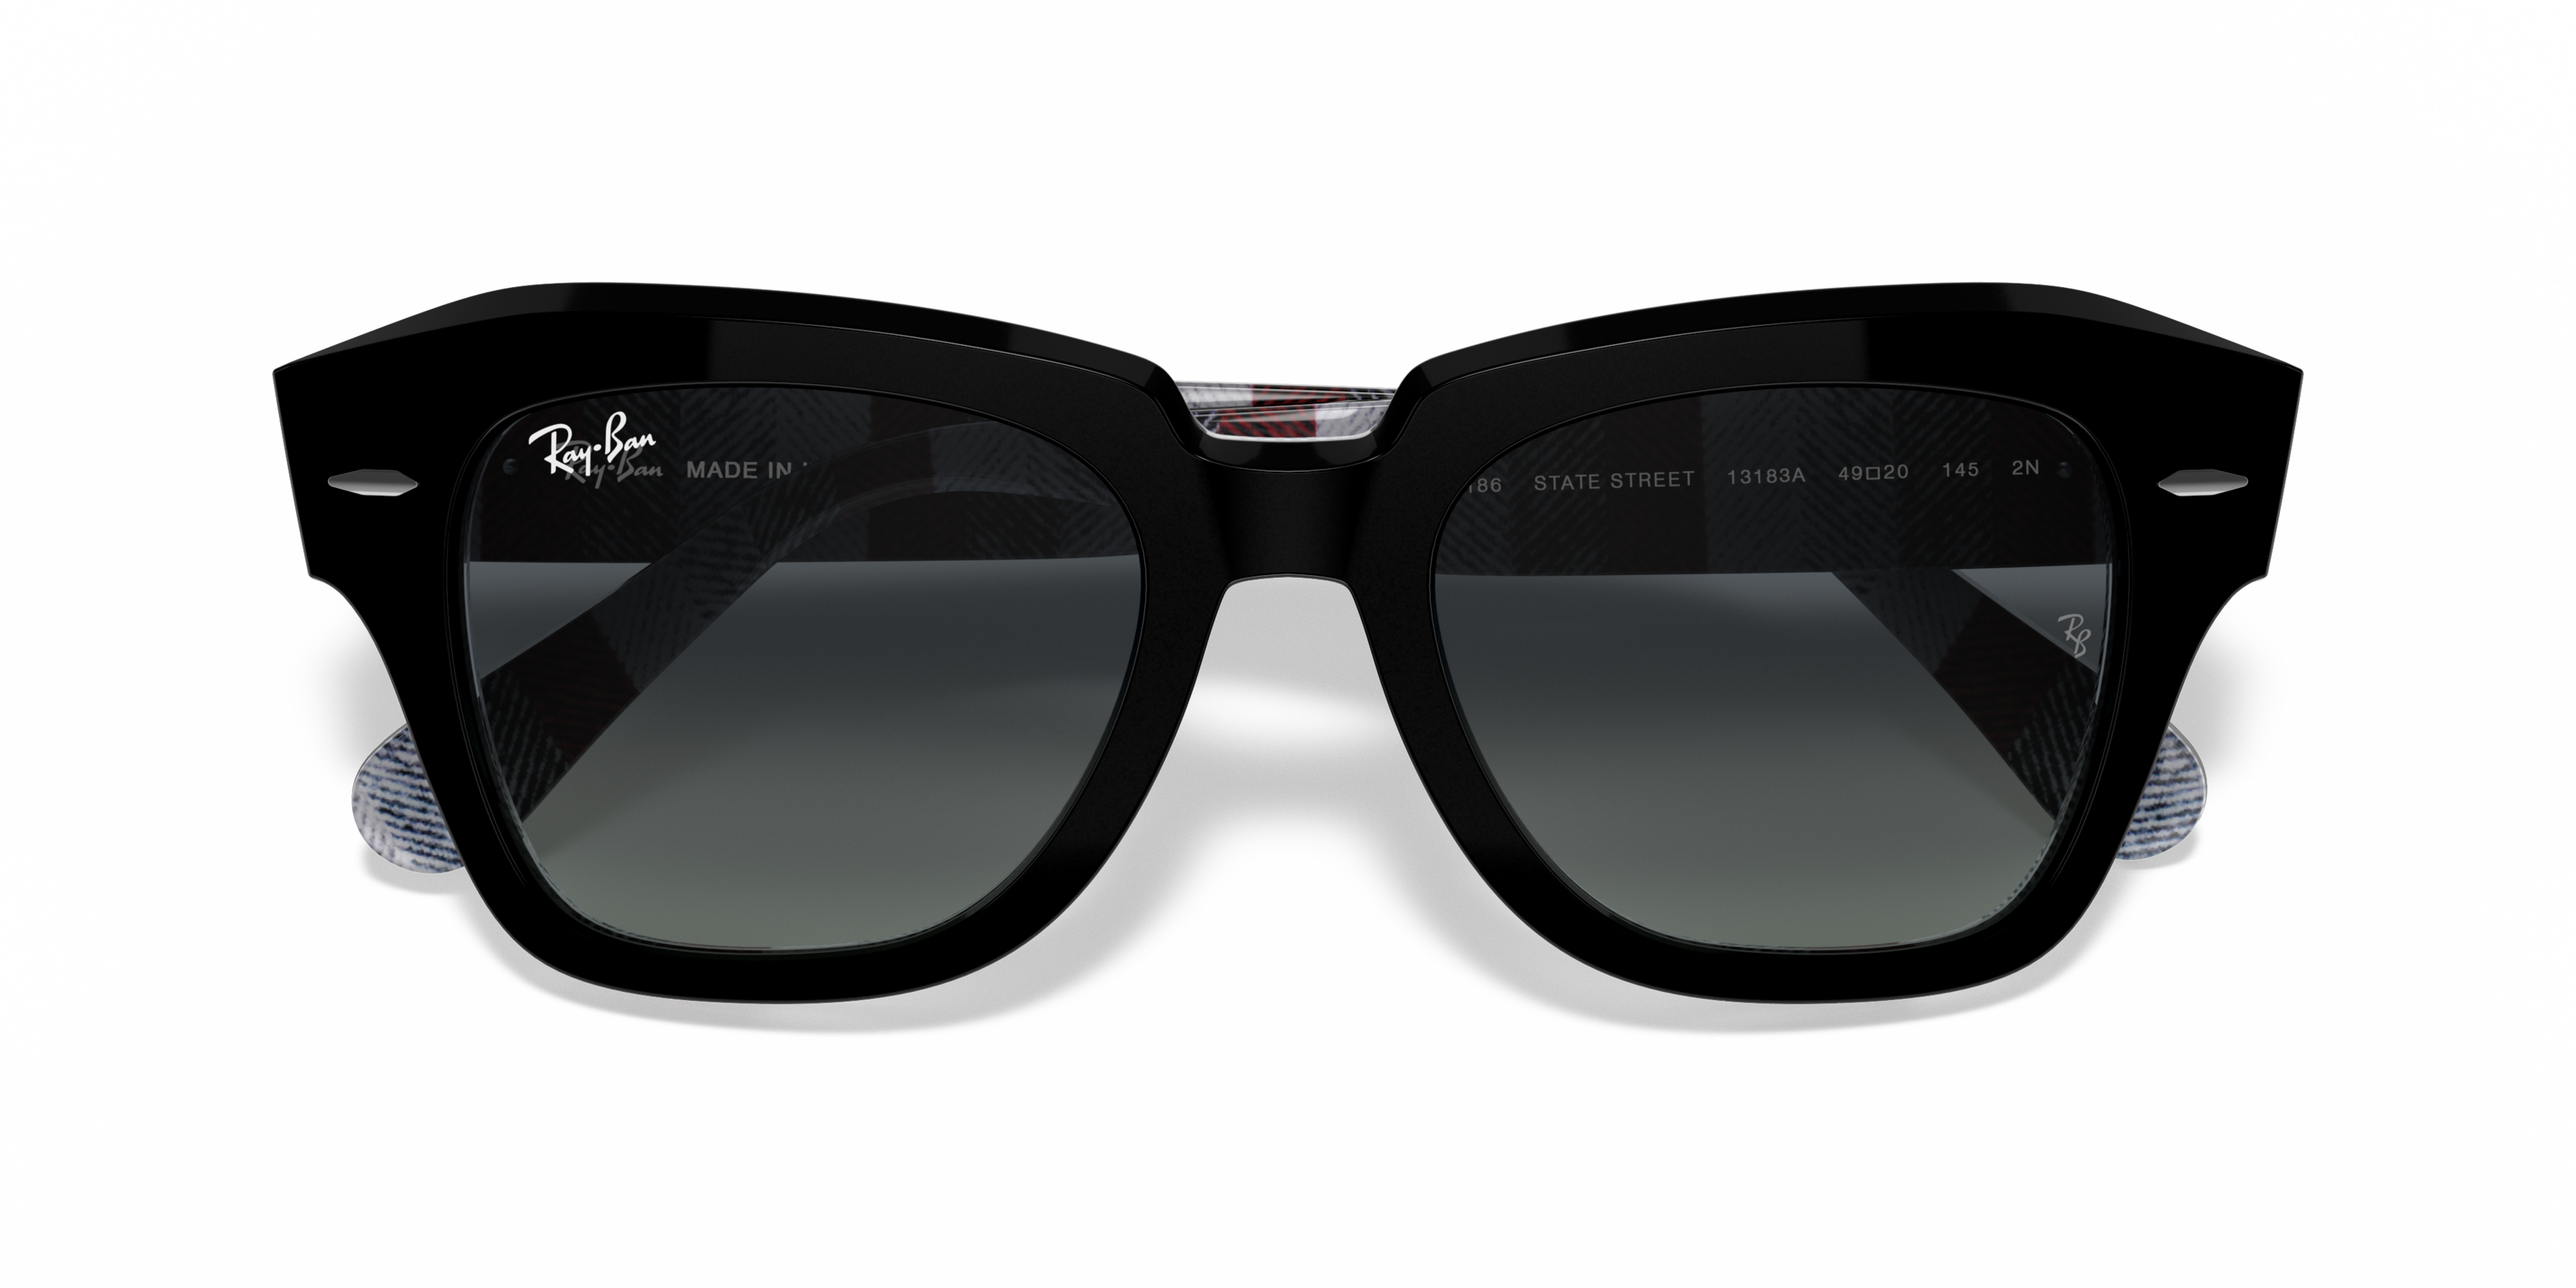 [products.image.folded] Ray-Ban State Street RB2186 13183A